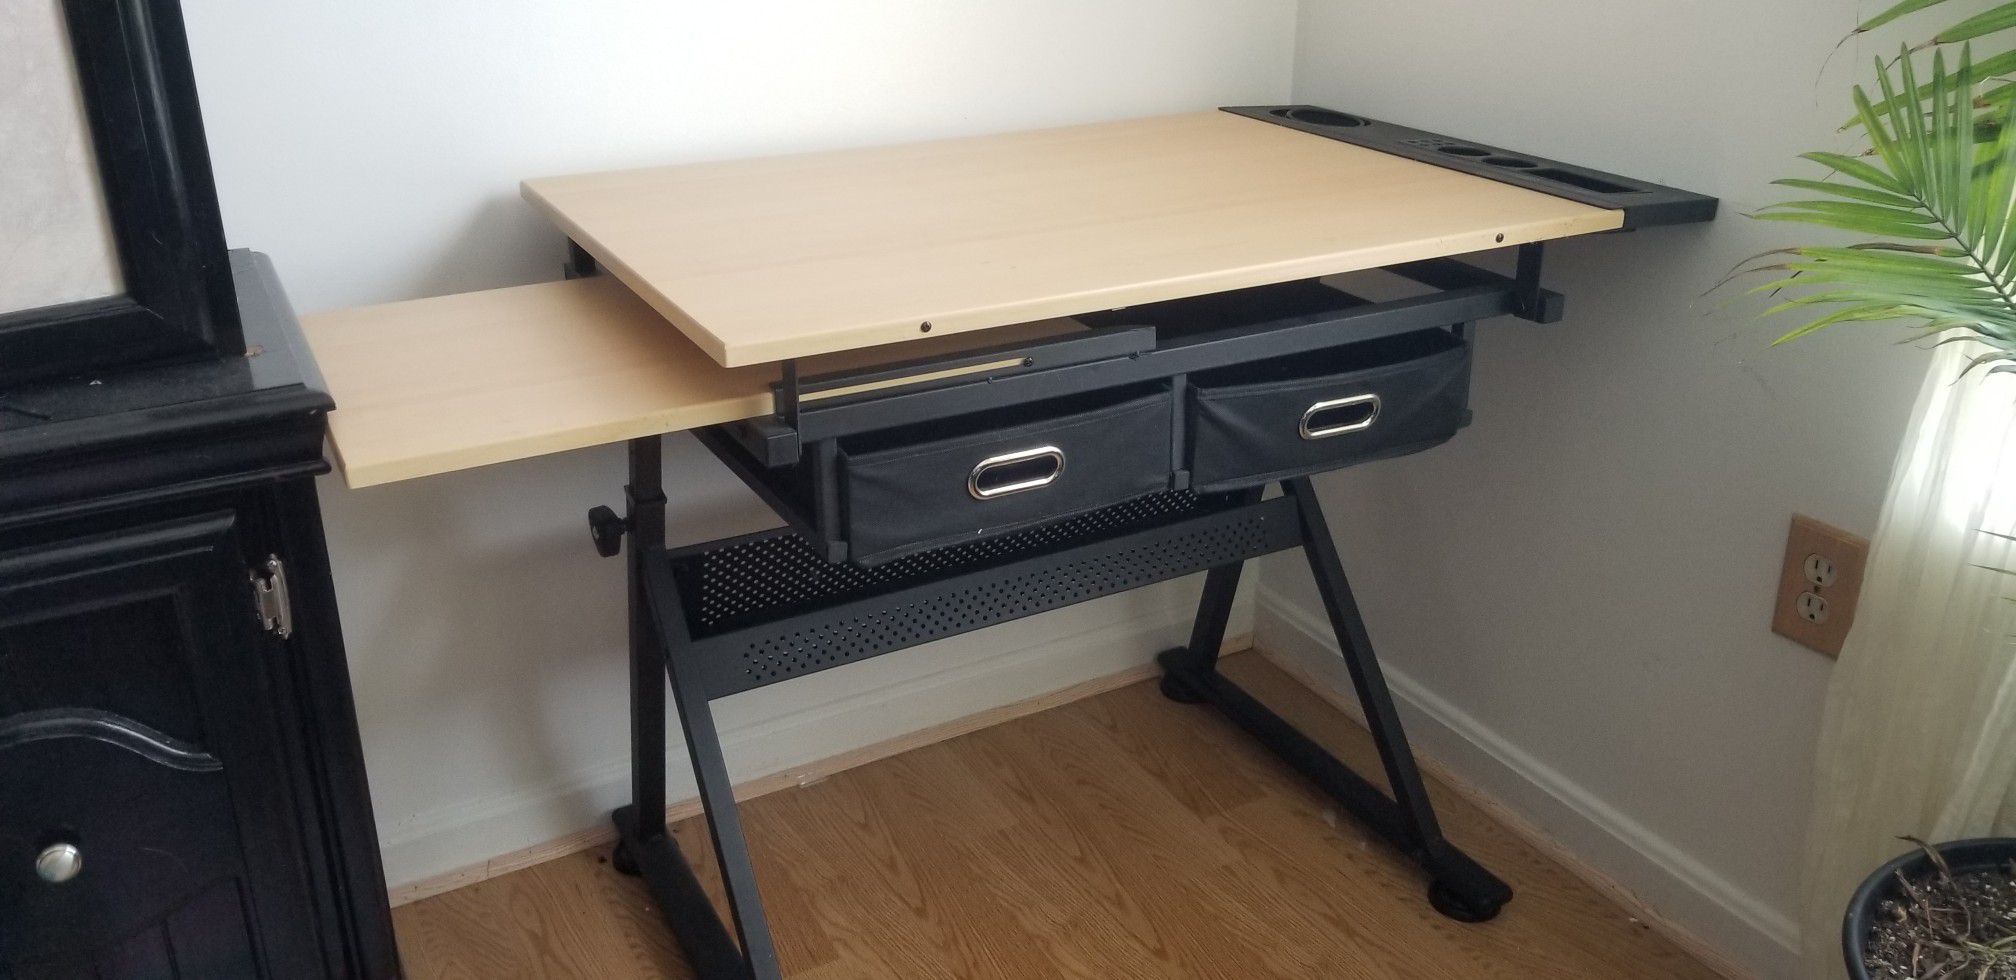 Drafting/craft table